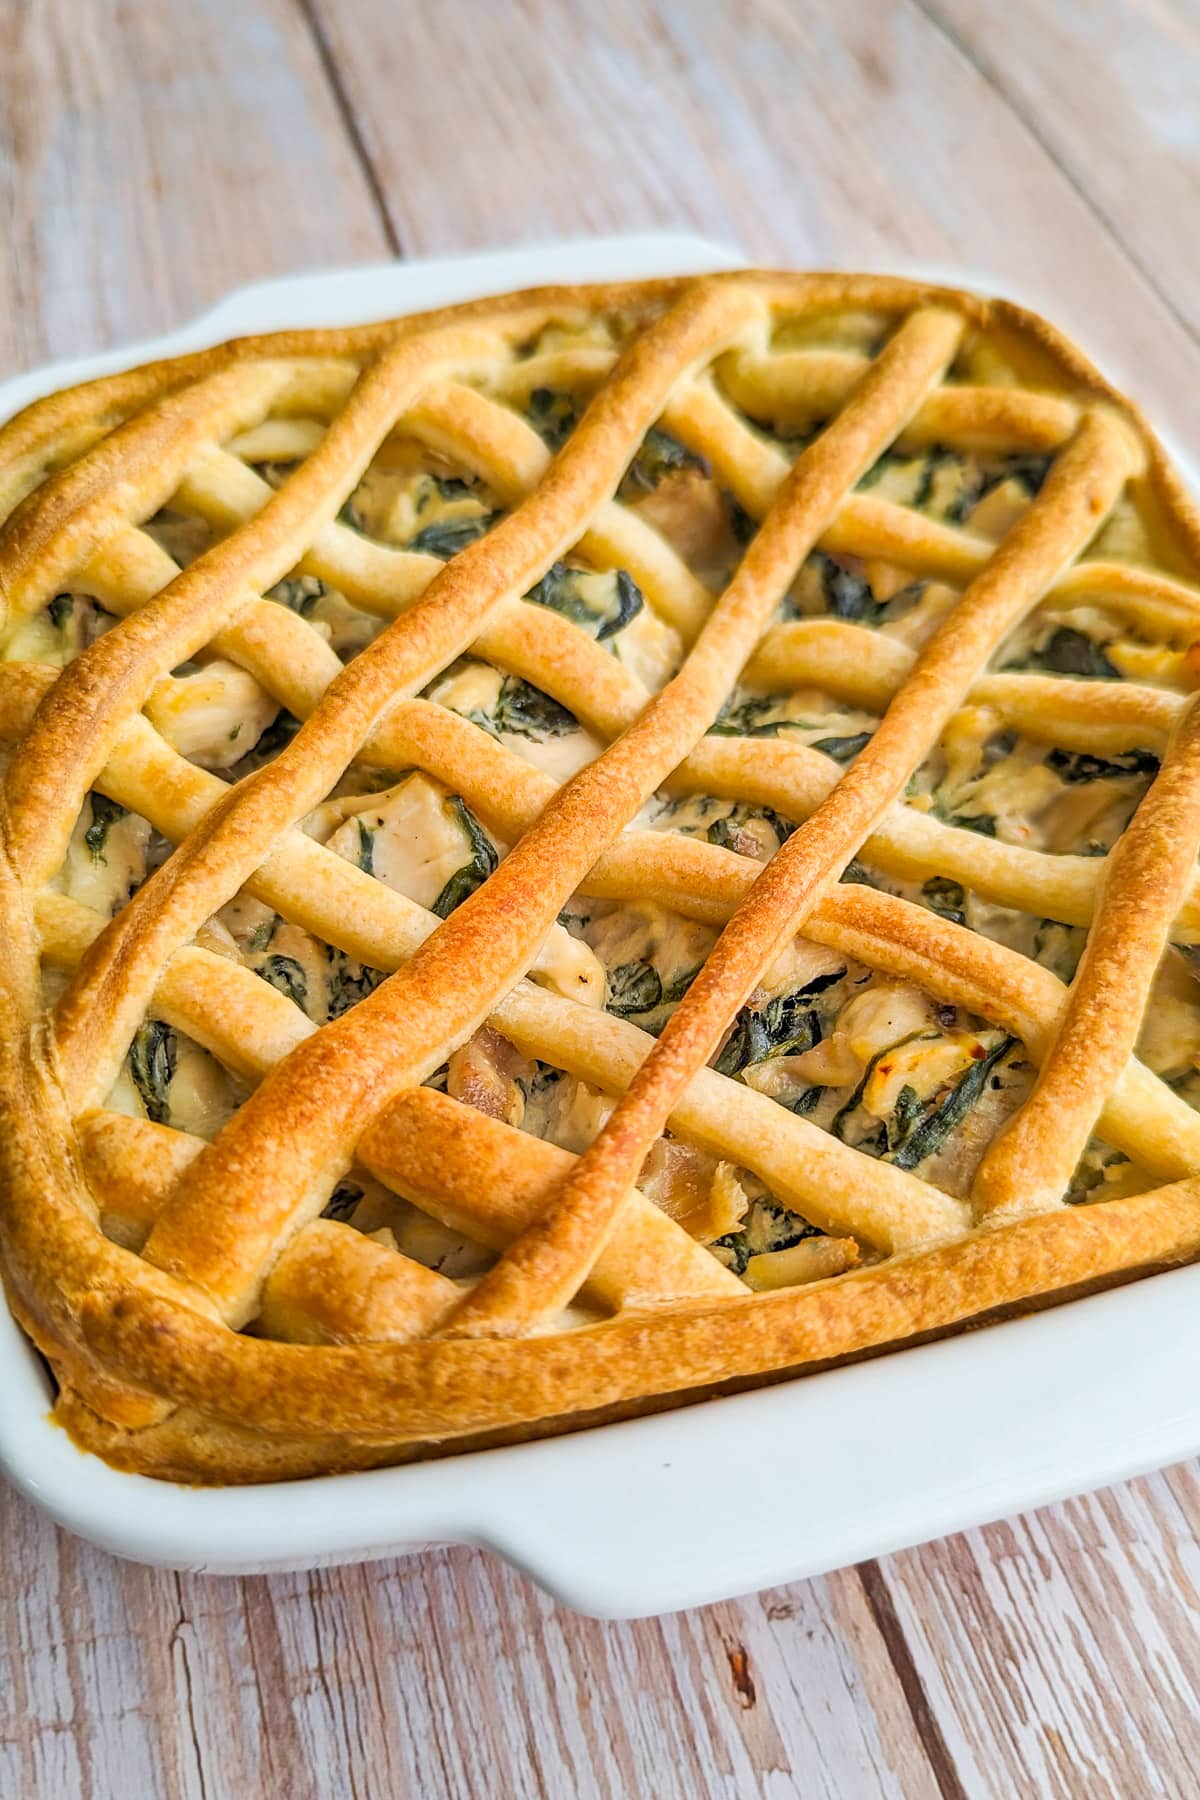 Chicken pie with spinach and chicken on a wooden table.